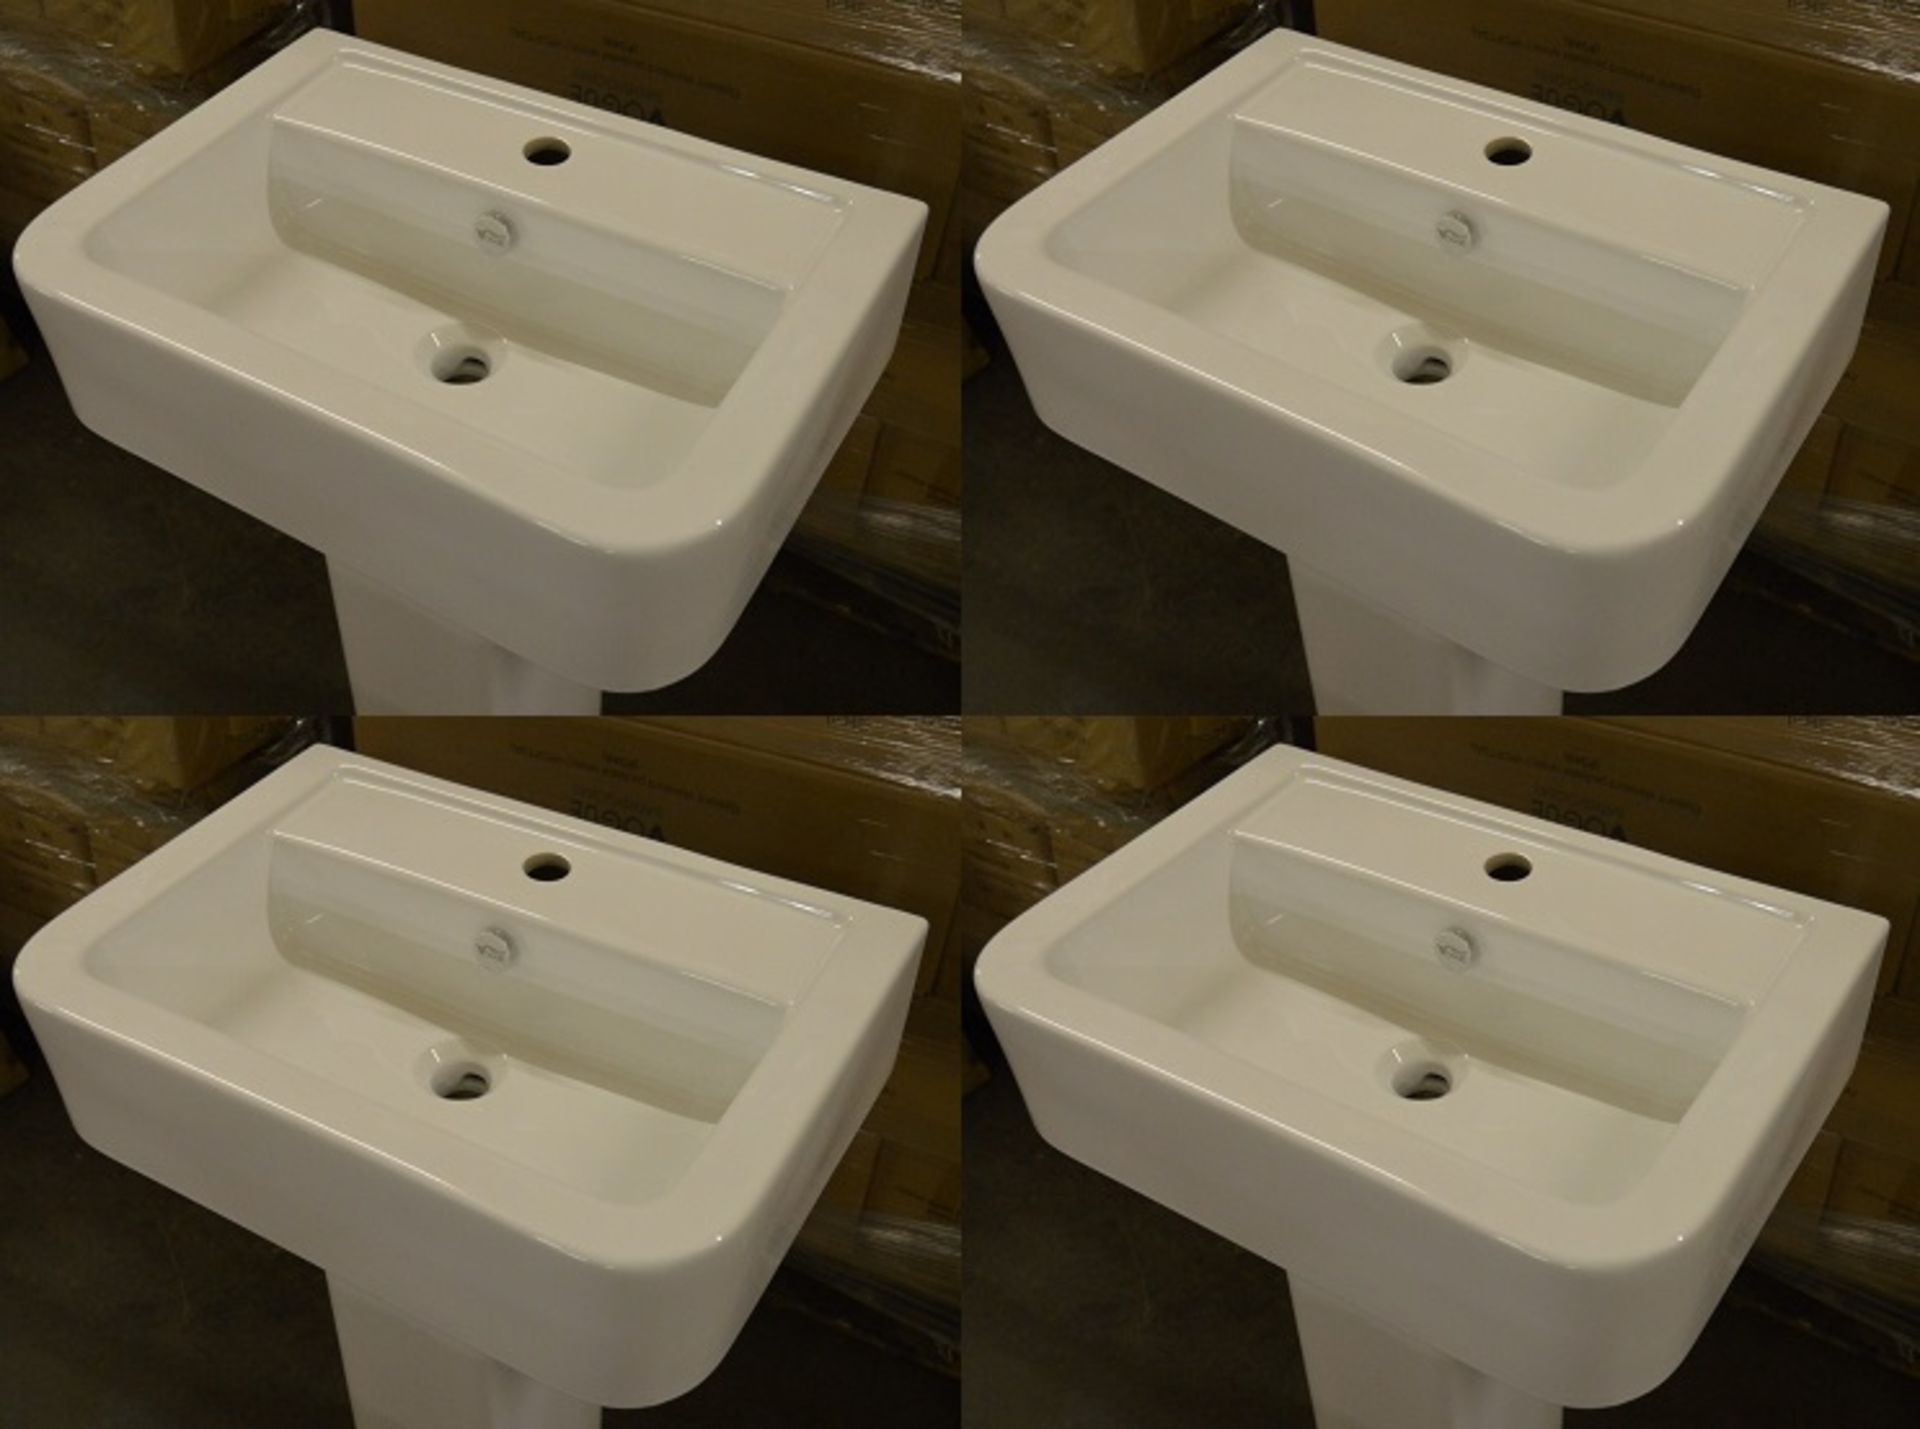 4 x Vogue Bathrooms OPTIONS Single Tap Hole SINK BASINS With Pedestals - 580mm Width - Brand New